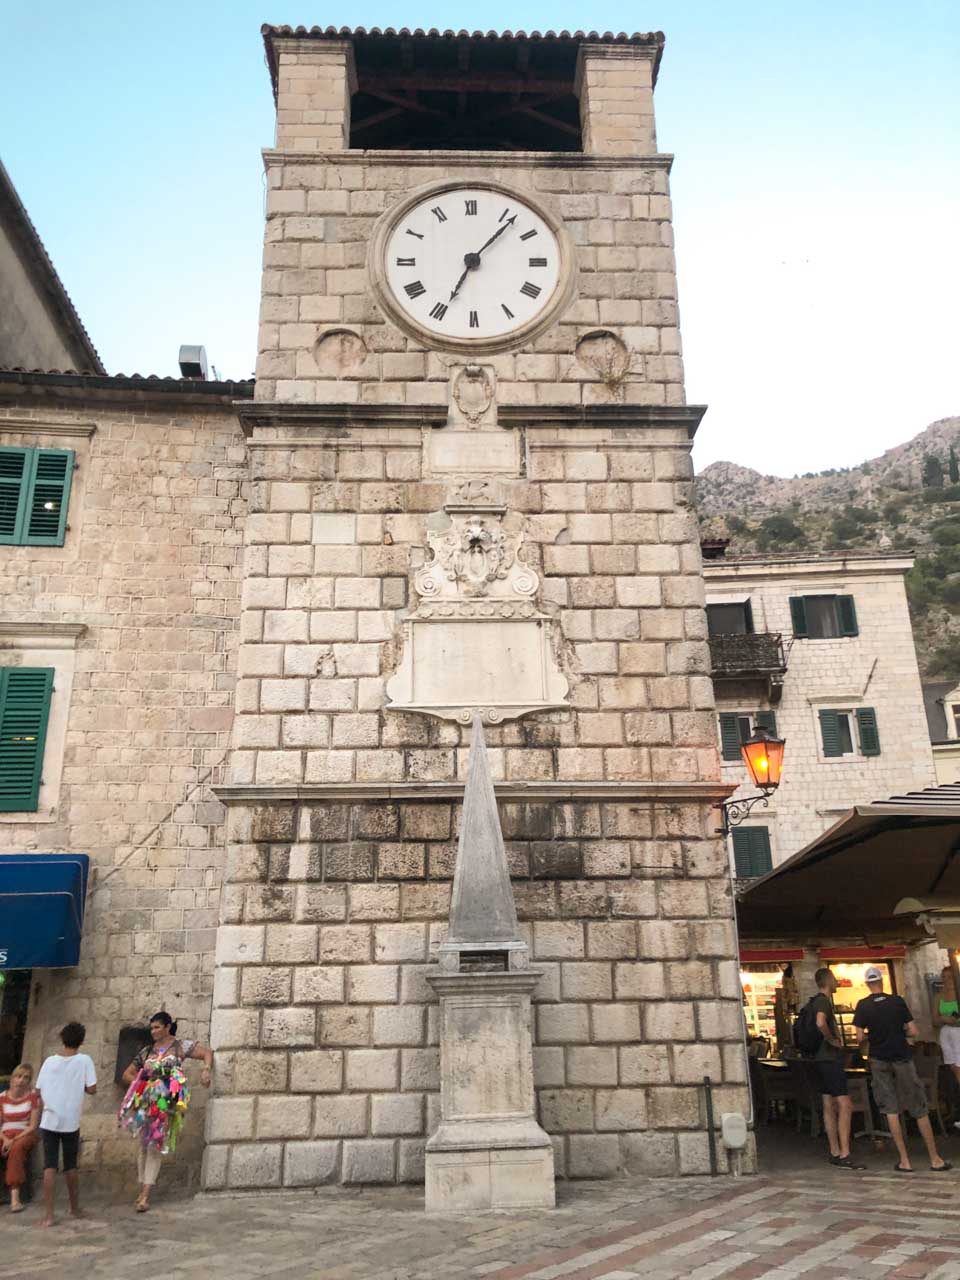 Clock tower in Kotor Old Town